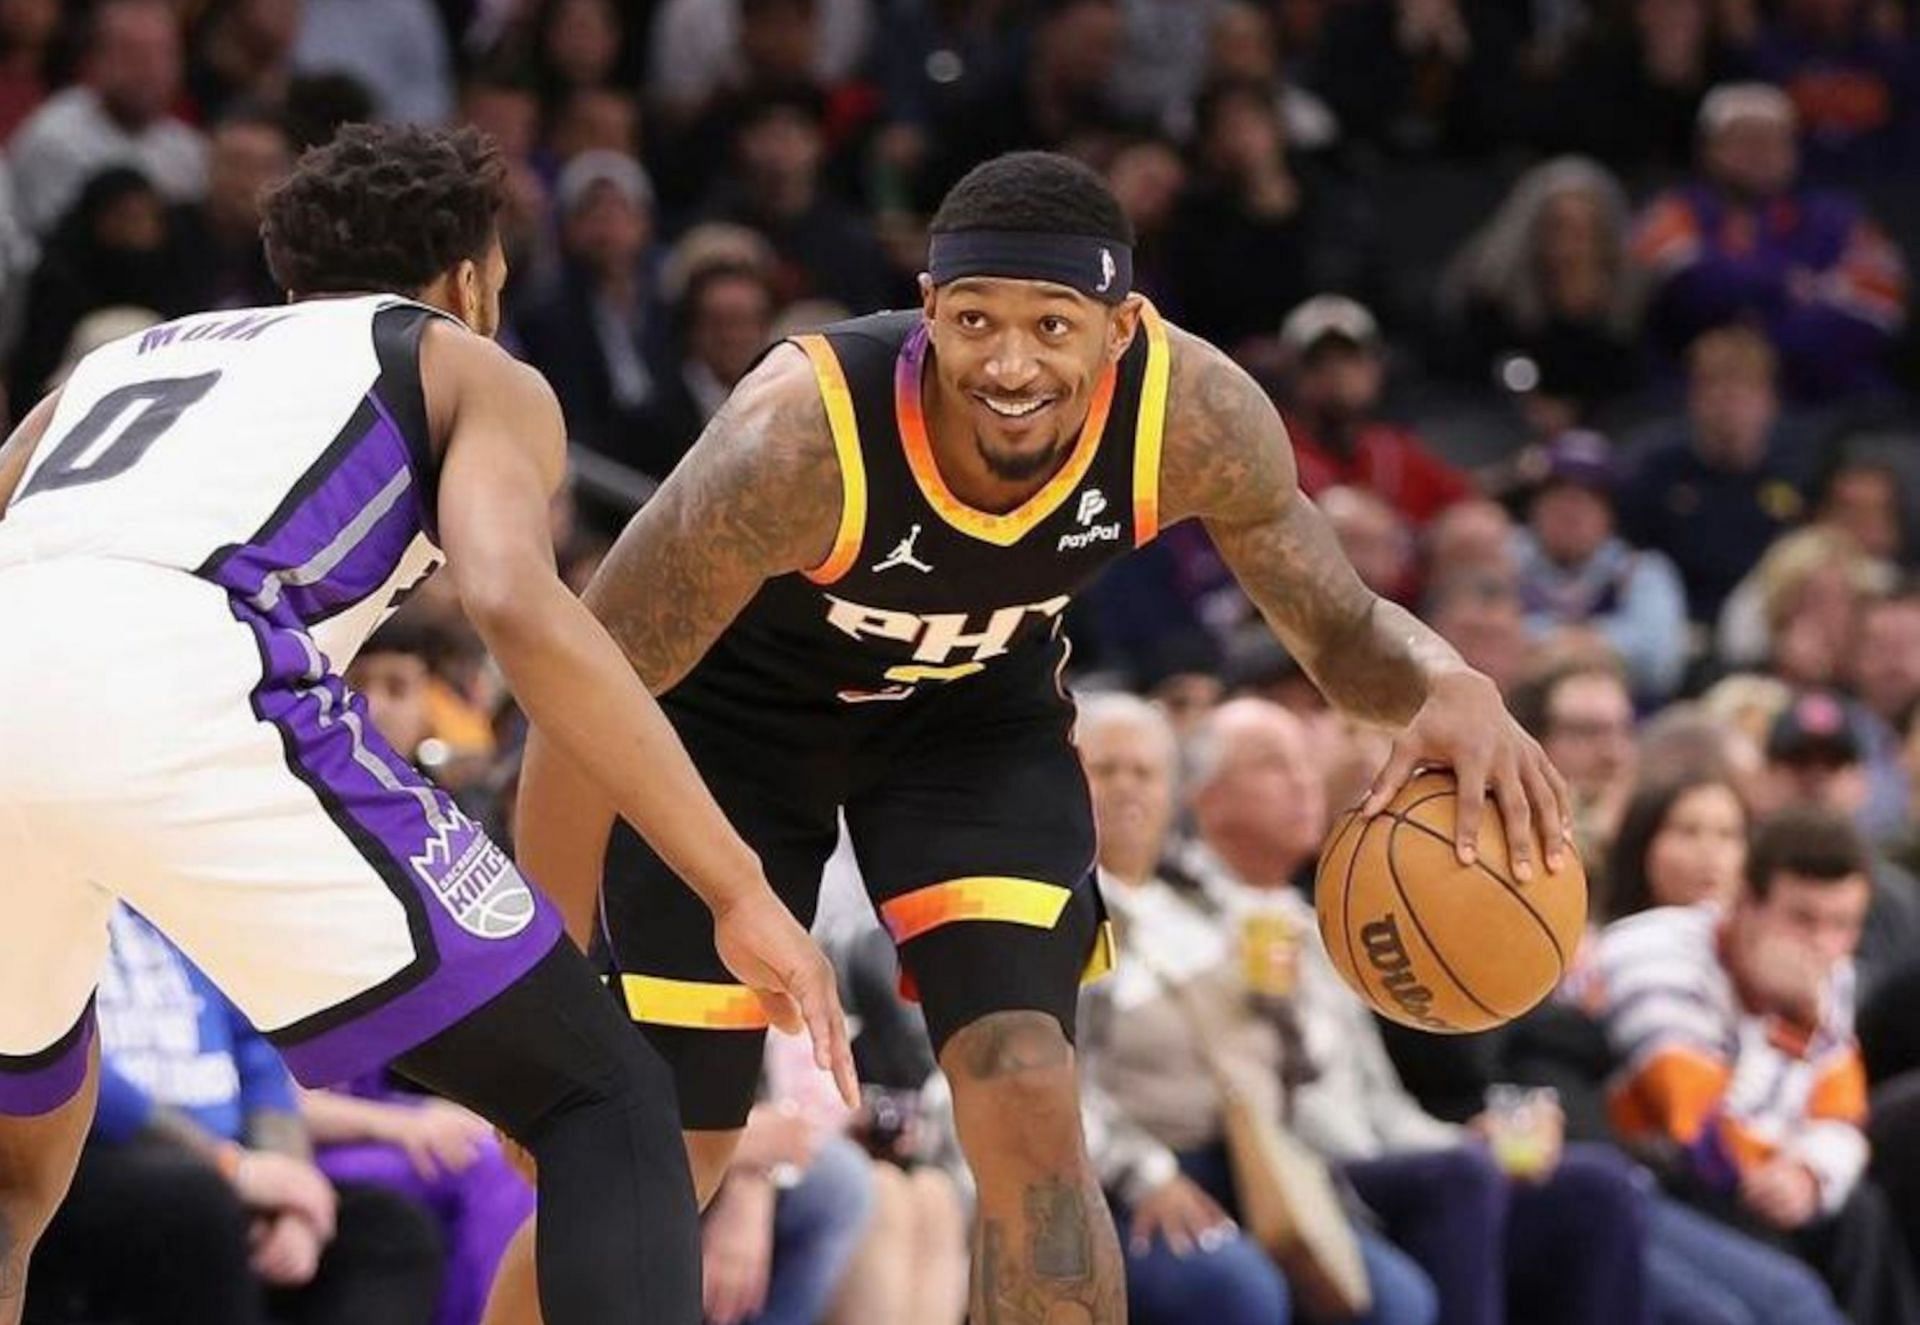 Bradley Beal has been playing superb basketball since getting traded to the Phoenix Suns.